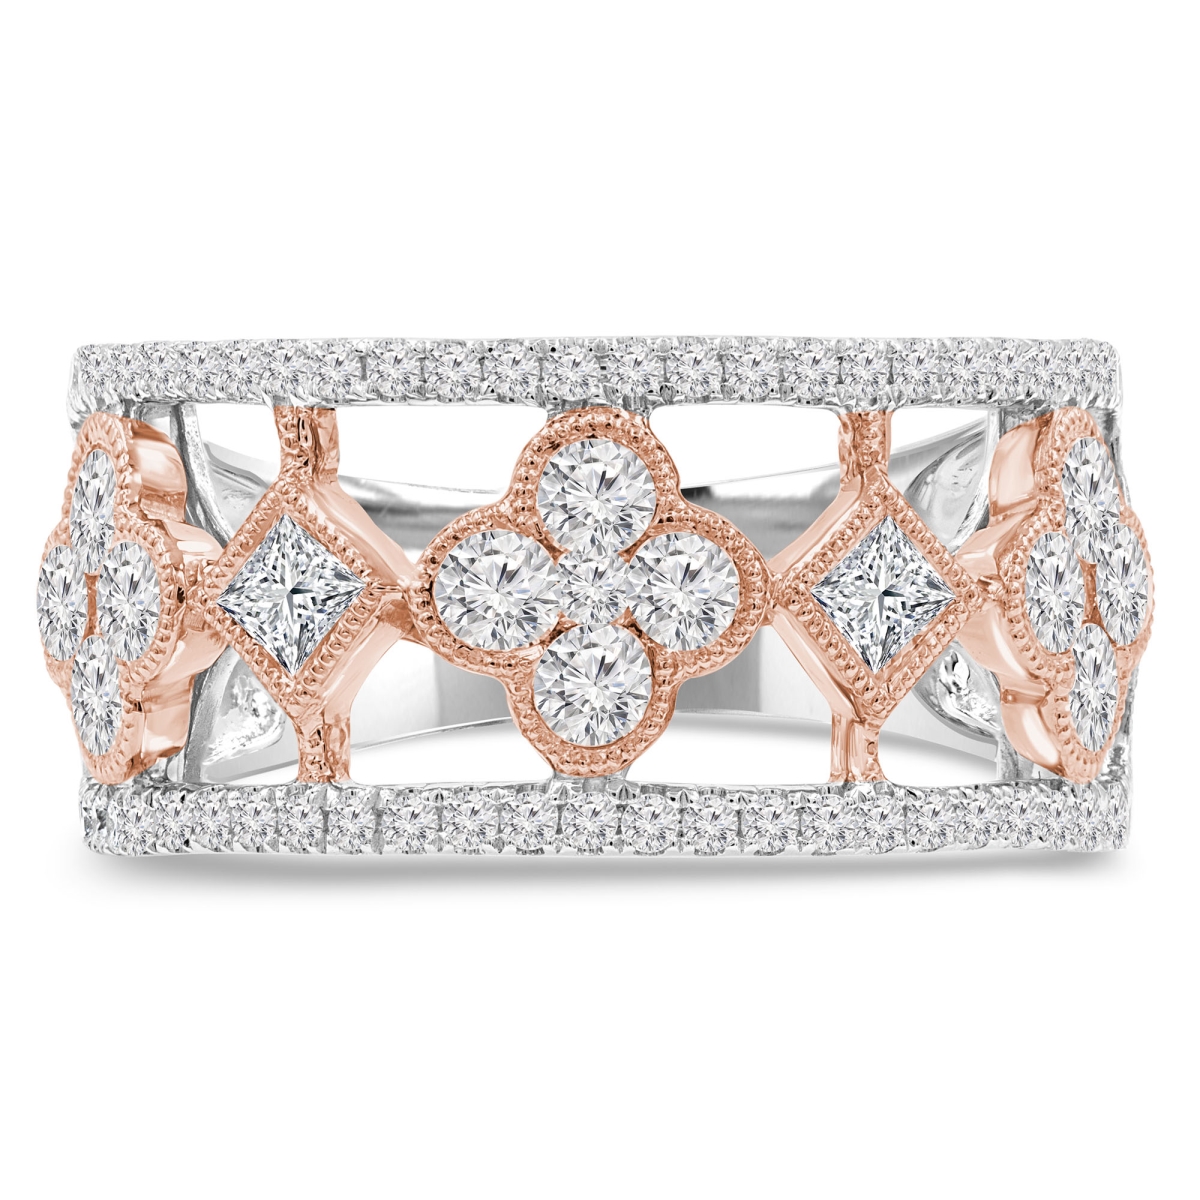 Picture of Majesty Diamonds MDR210138-6.5 1.13 CTW Princess Diamond Cocktail Ring in 14K Two-Tone Gold - Size 6.5